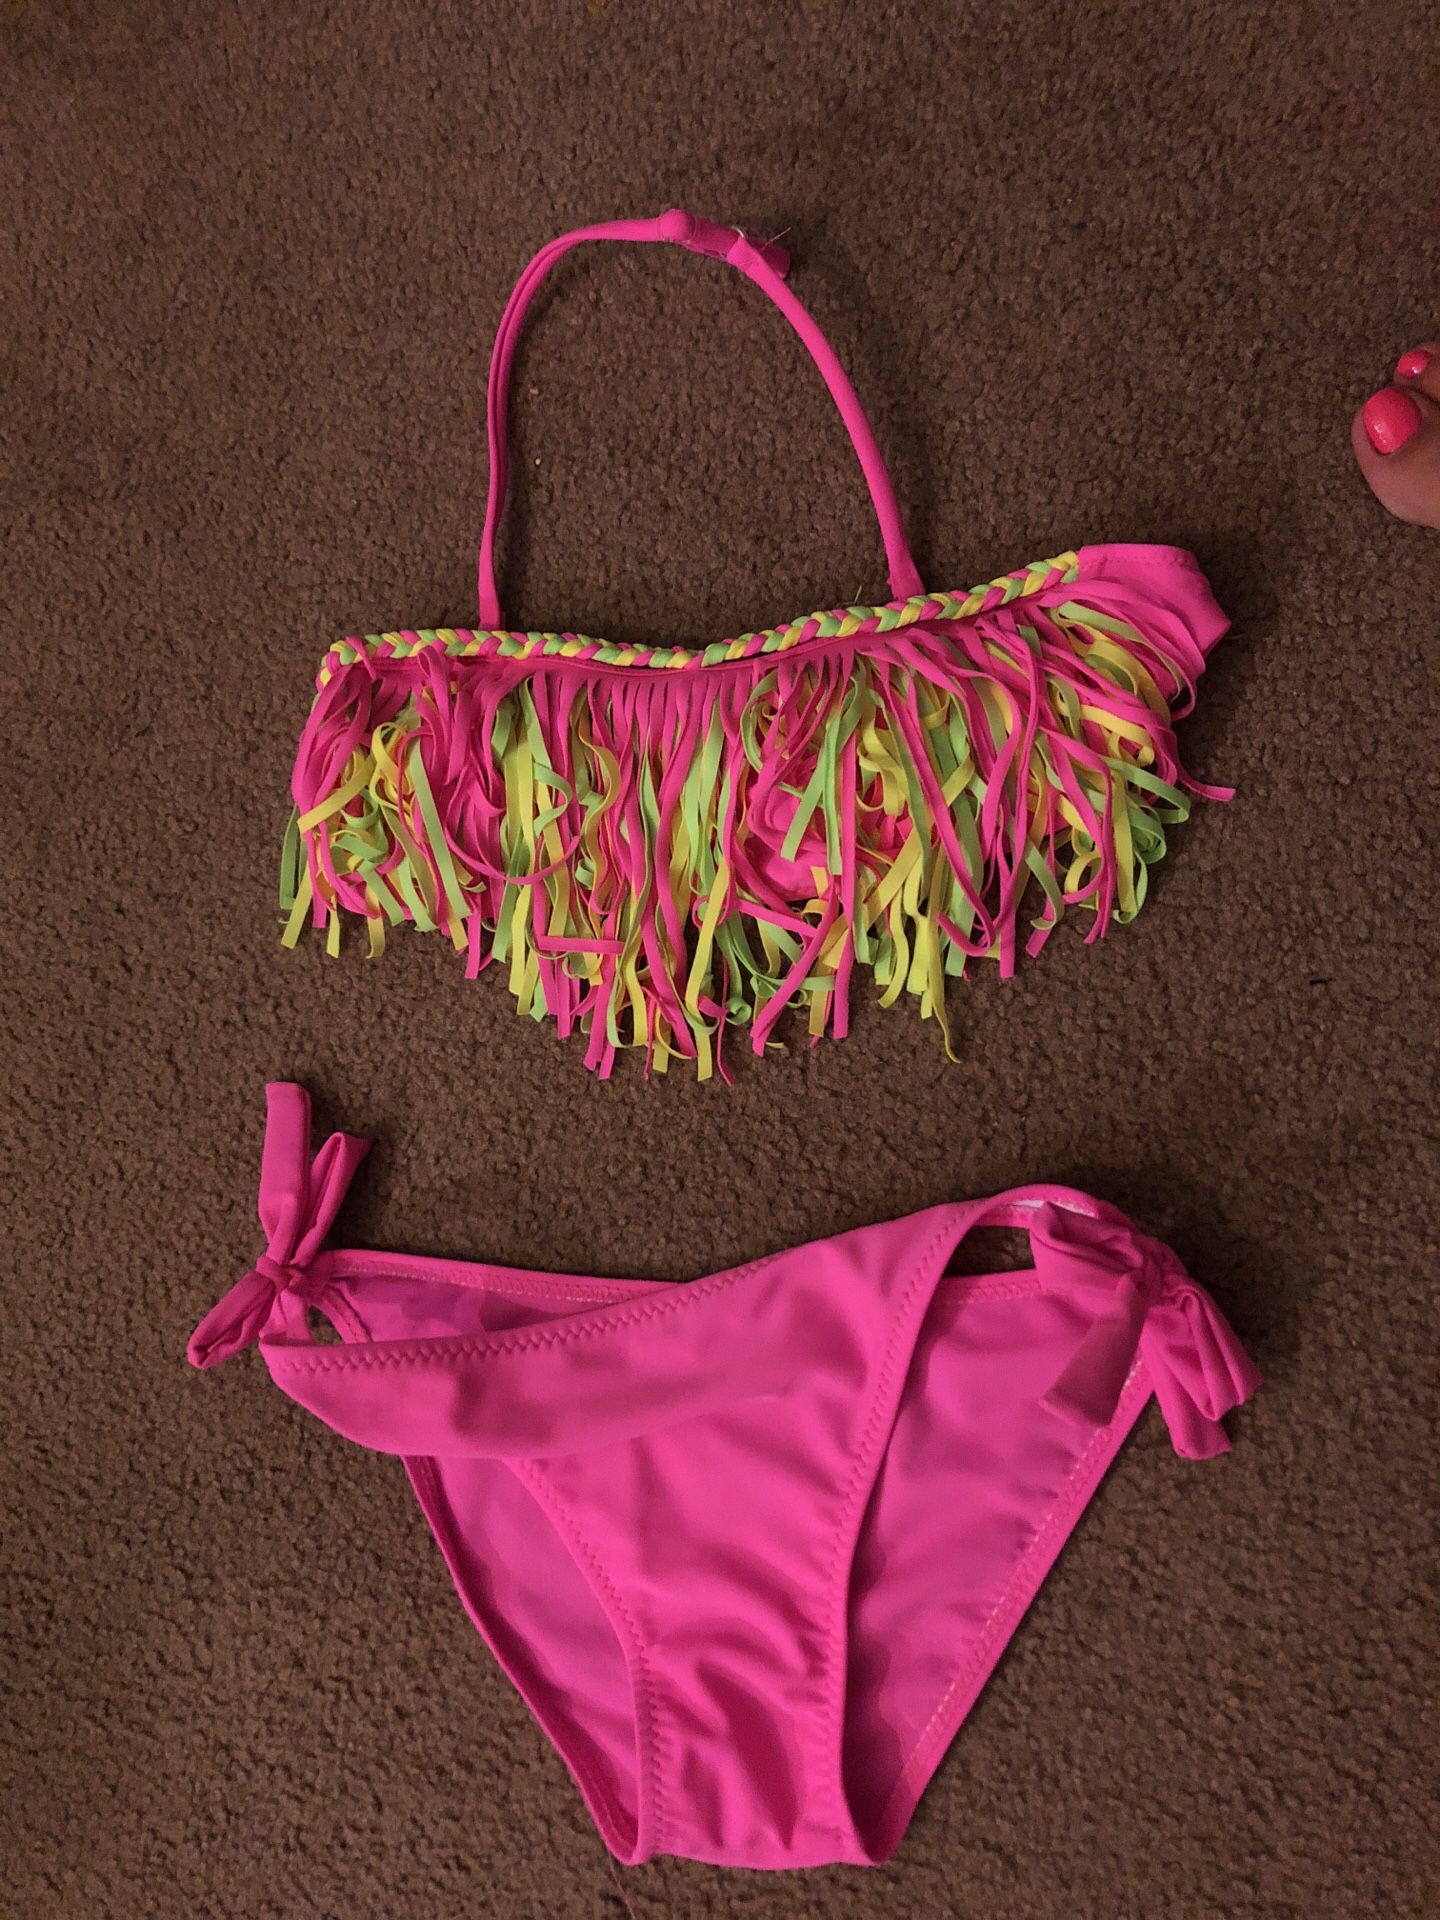 Girls/kids xl bathing suit (fit my 9 year old who wears 7/8 clothes)